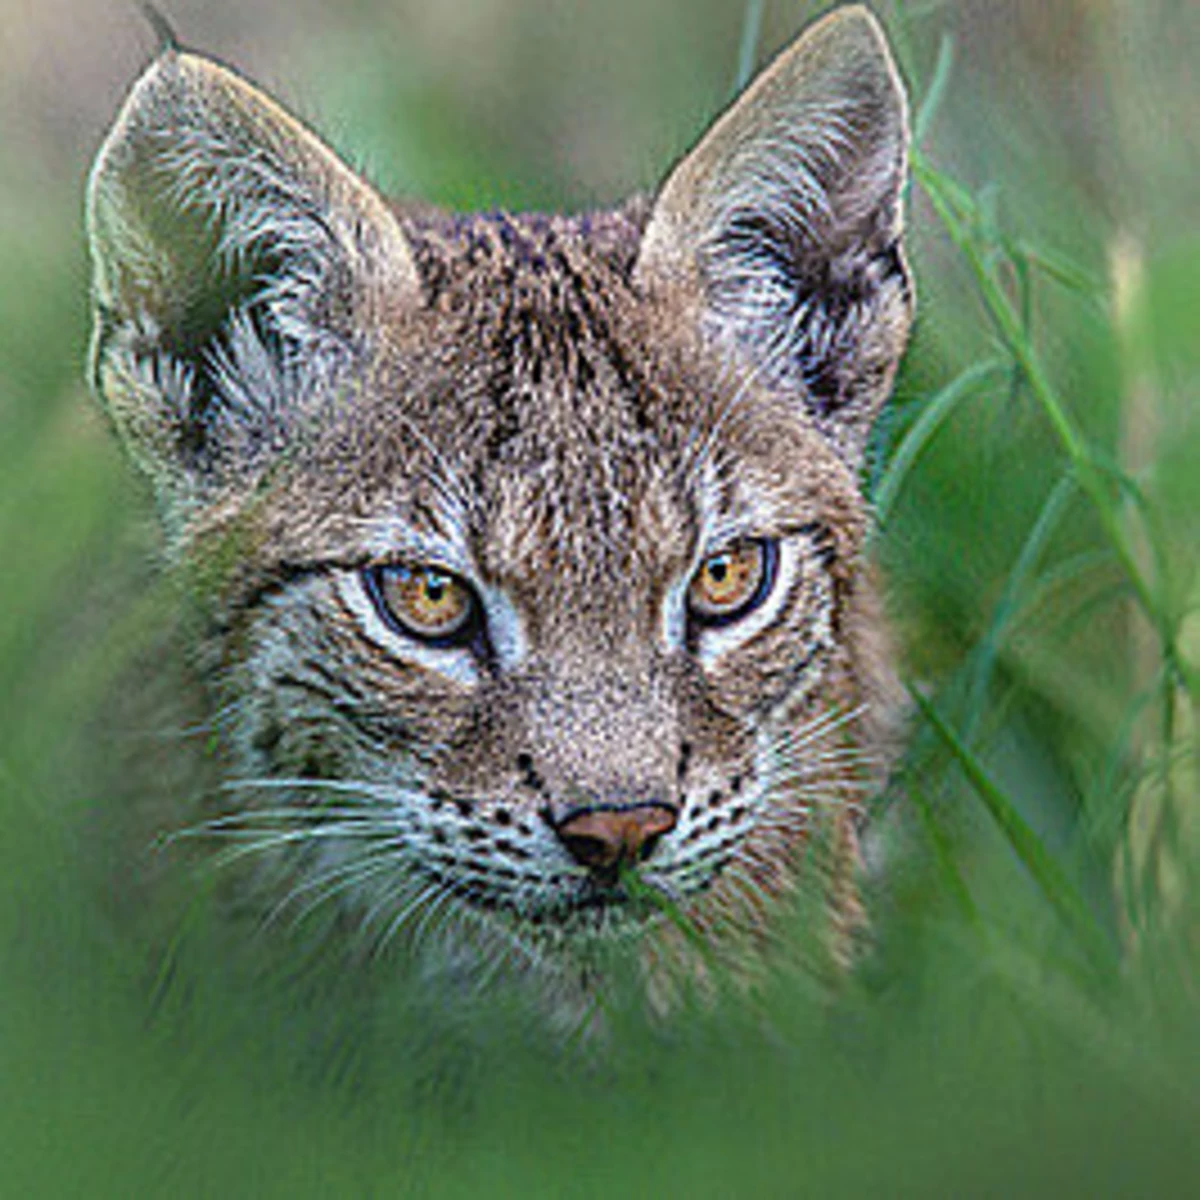 Bobcat released into the wild after spending winter recovering at Virginia  wildlife center